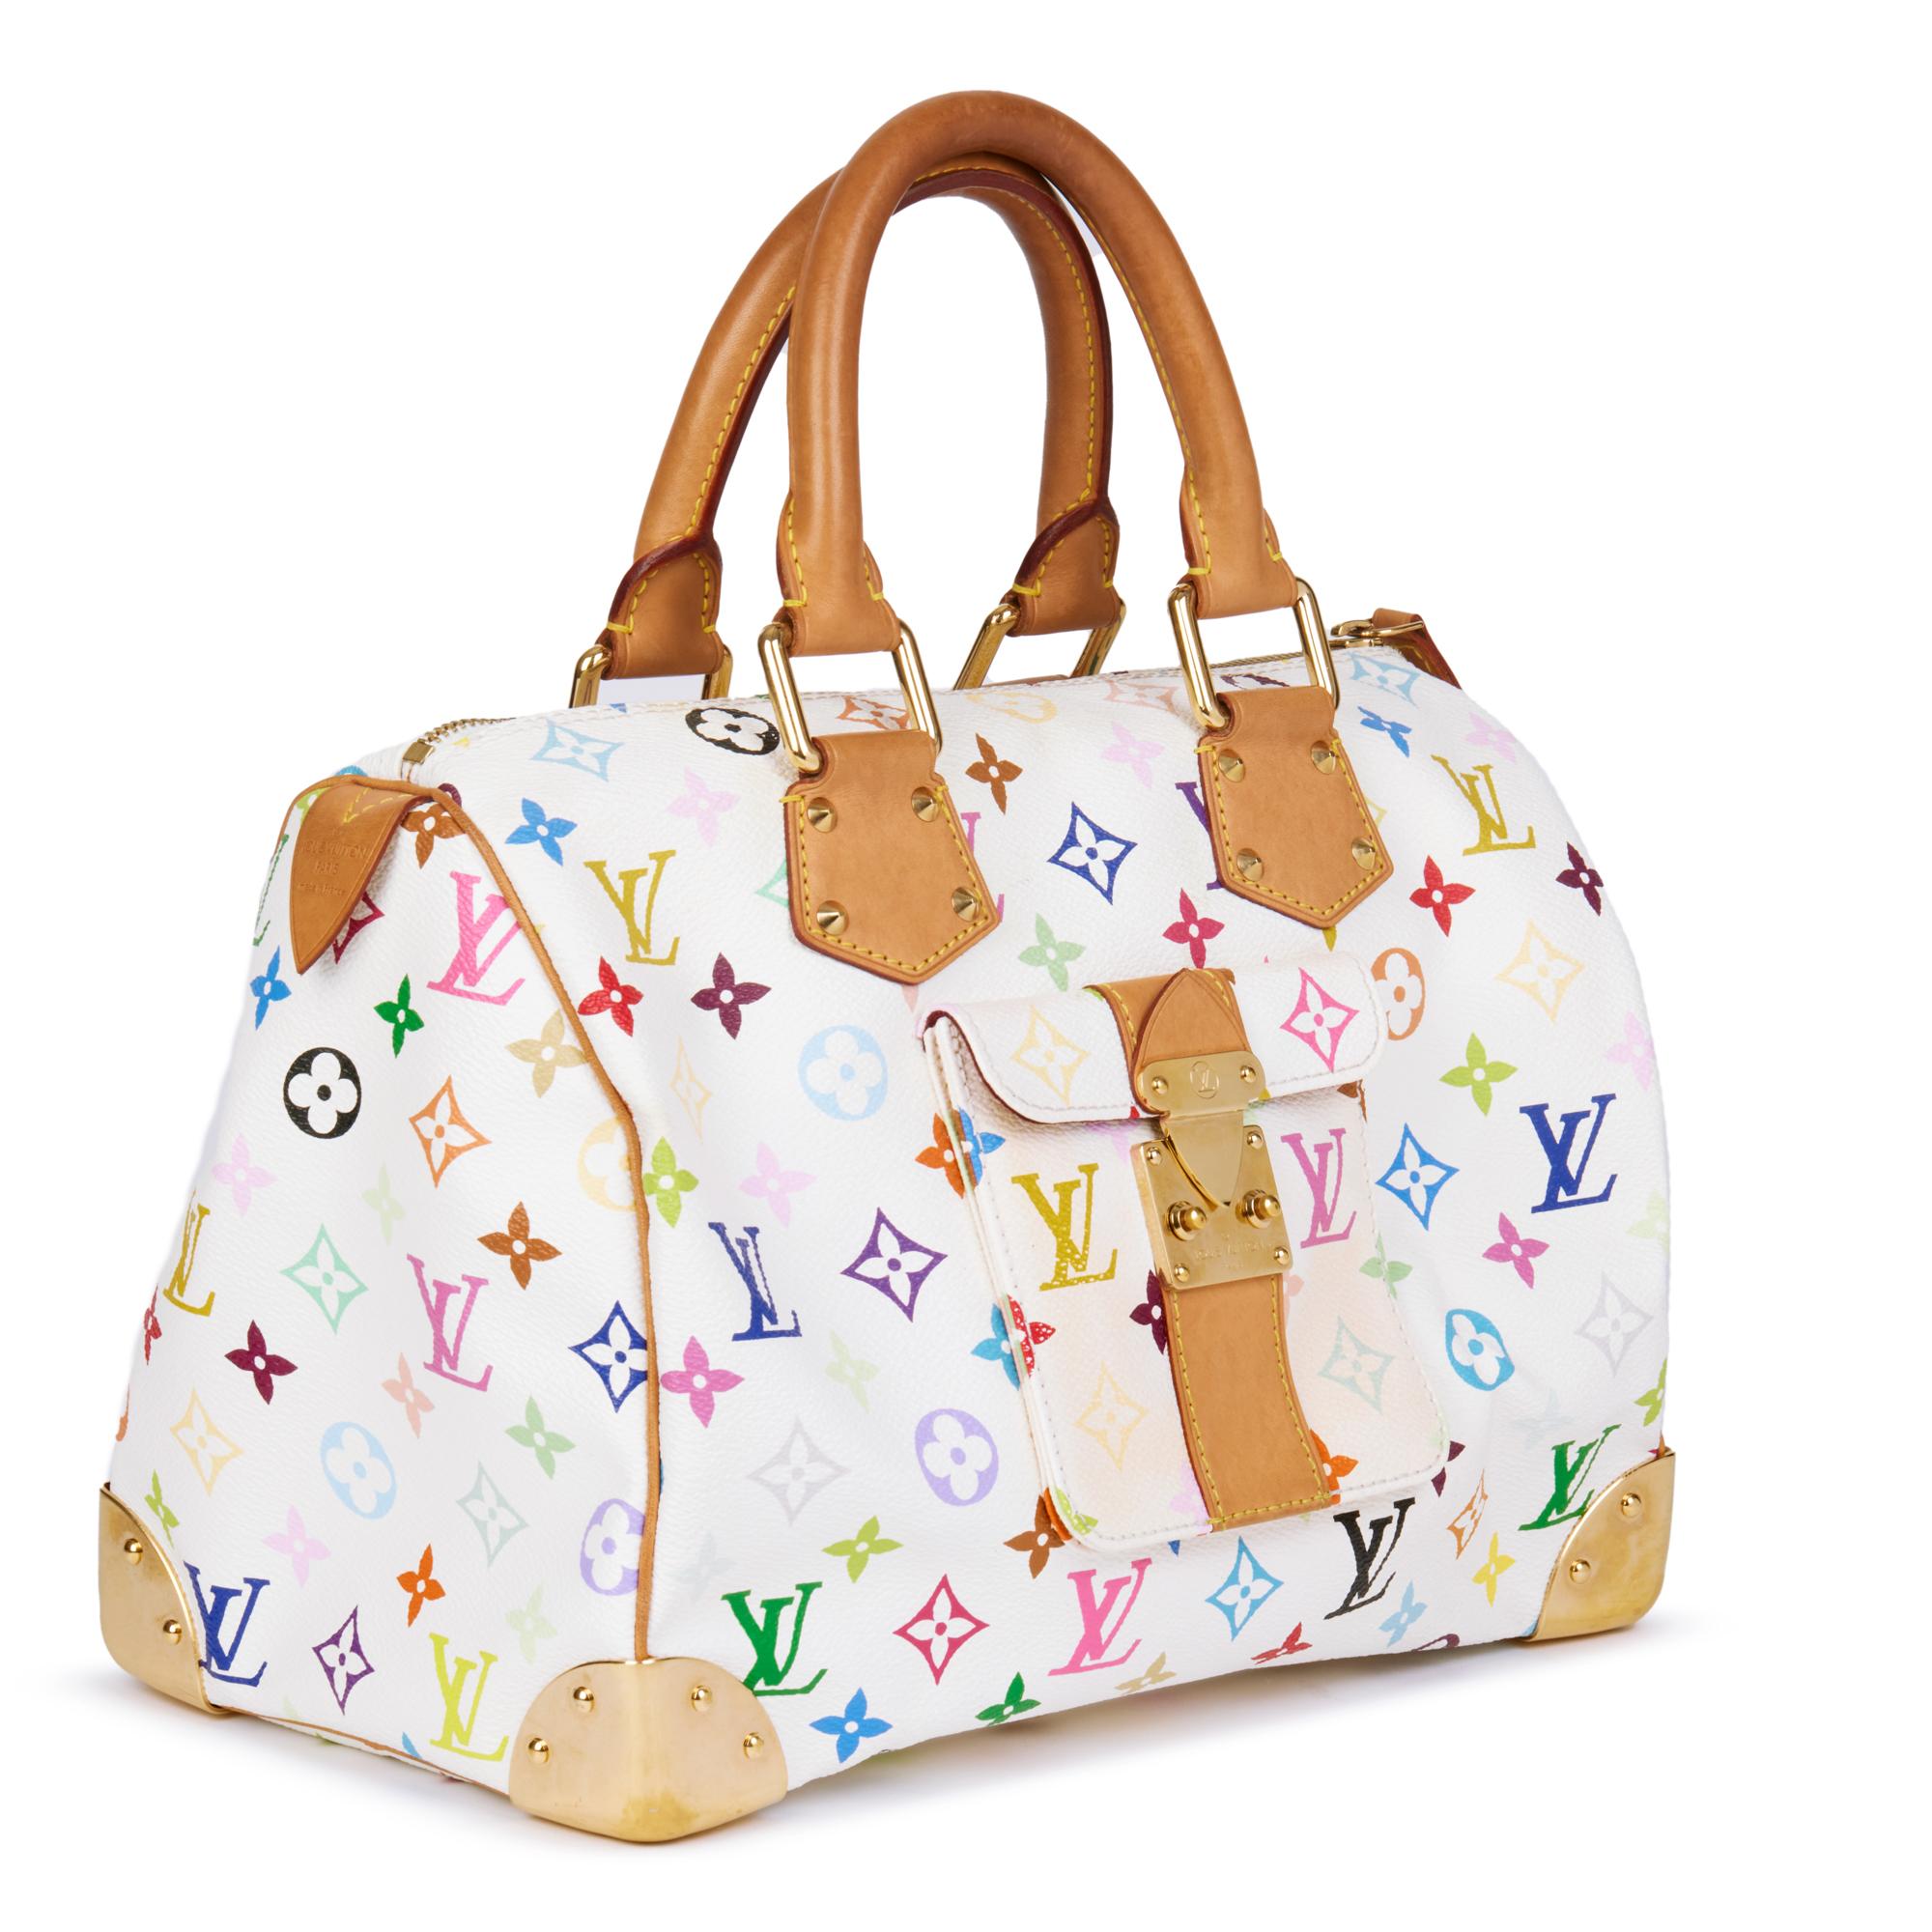 LOUIS VUITTON
White Multicolour Monogram Coated Canvas & Vachetta Leather Speedy 30

Serial Number: SP1003
Age (Circa): 2003
Accompanied By: Louis Vuitton Dust Bag, Invoice
Authenticity Details: Date Stamp (Made in France)
Gender: Ladies
Type: